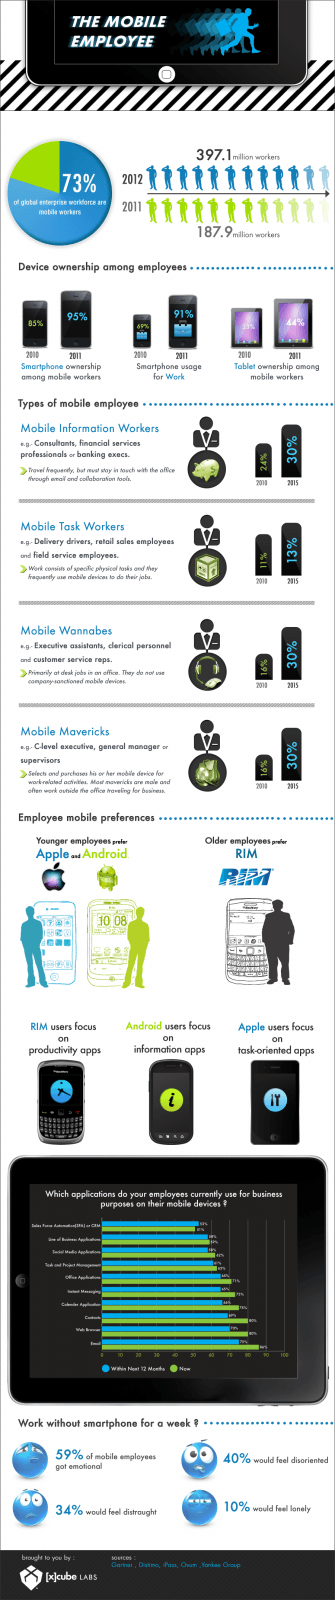 The Mobile Employee by [x]cube LABS